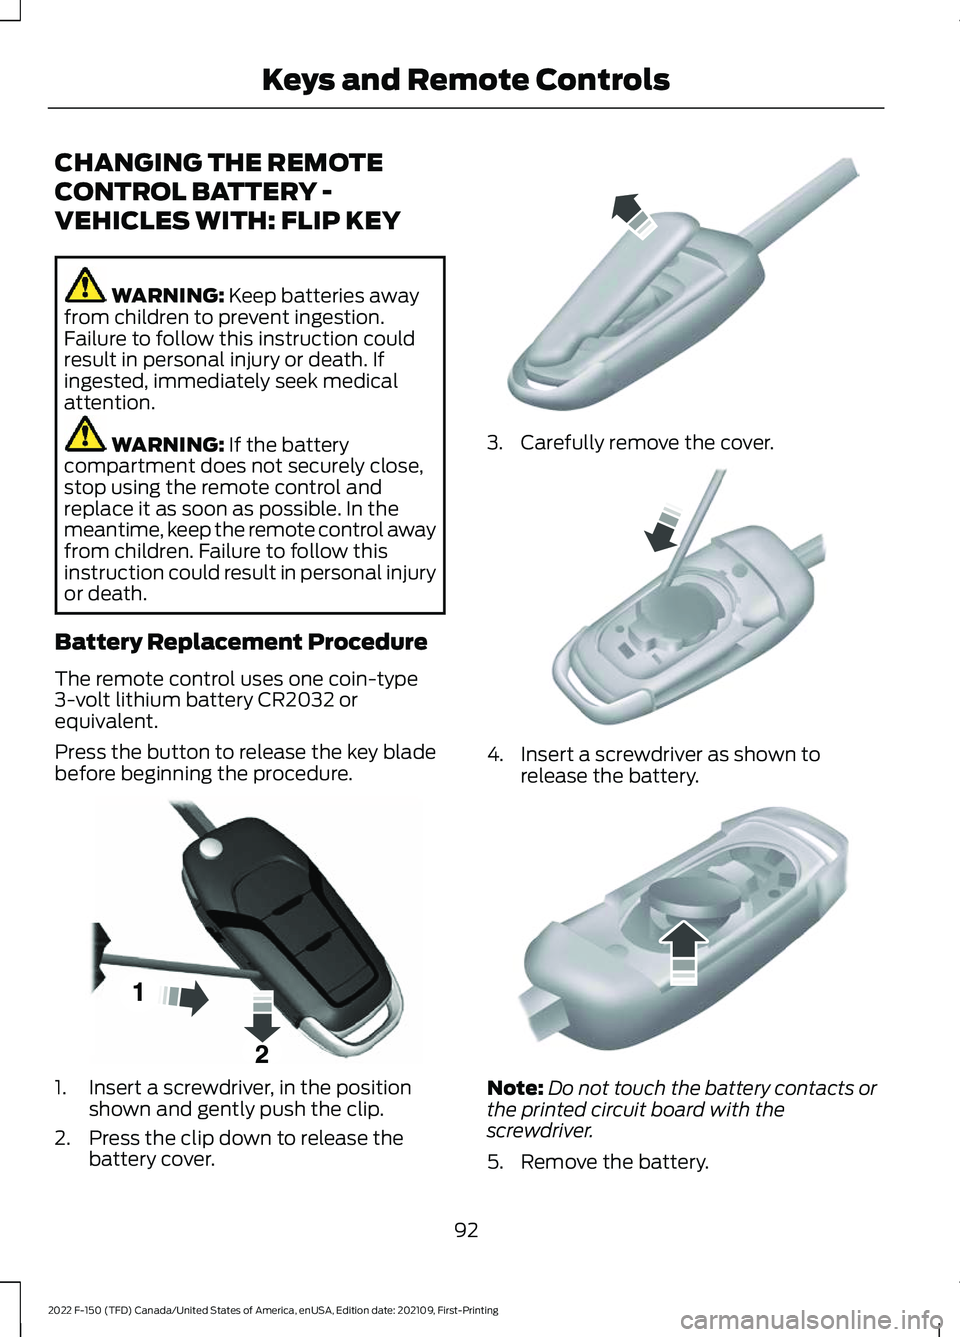 FORD F-150 2022 Owners Guide CHANGING THE REMOTE
CONTROL BATTERY -
VEHICLES WITH: FLIP KEY
WARNING: Keep batteries away
from children to prevent ingestion.
Failure to follow this instruction could
result in personal injury or dea